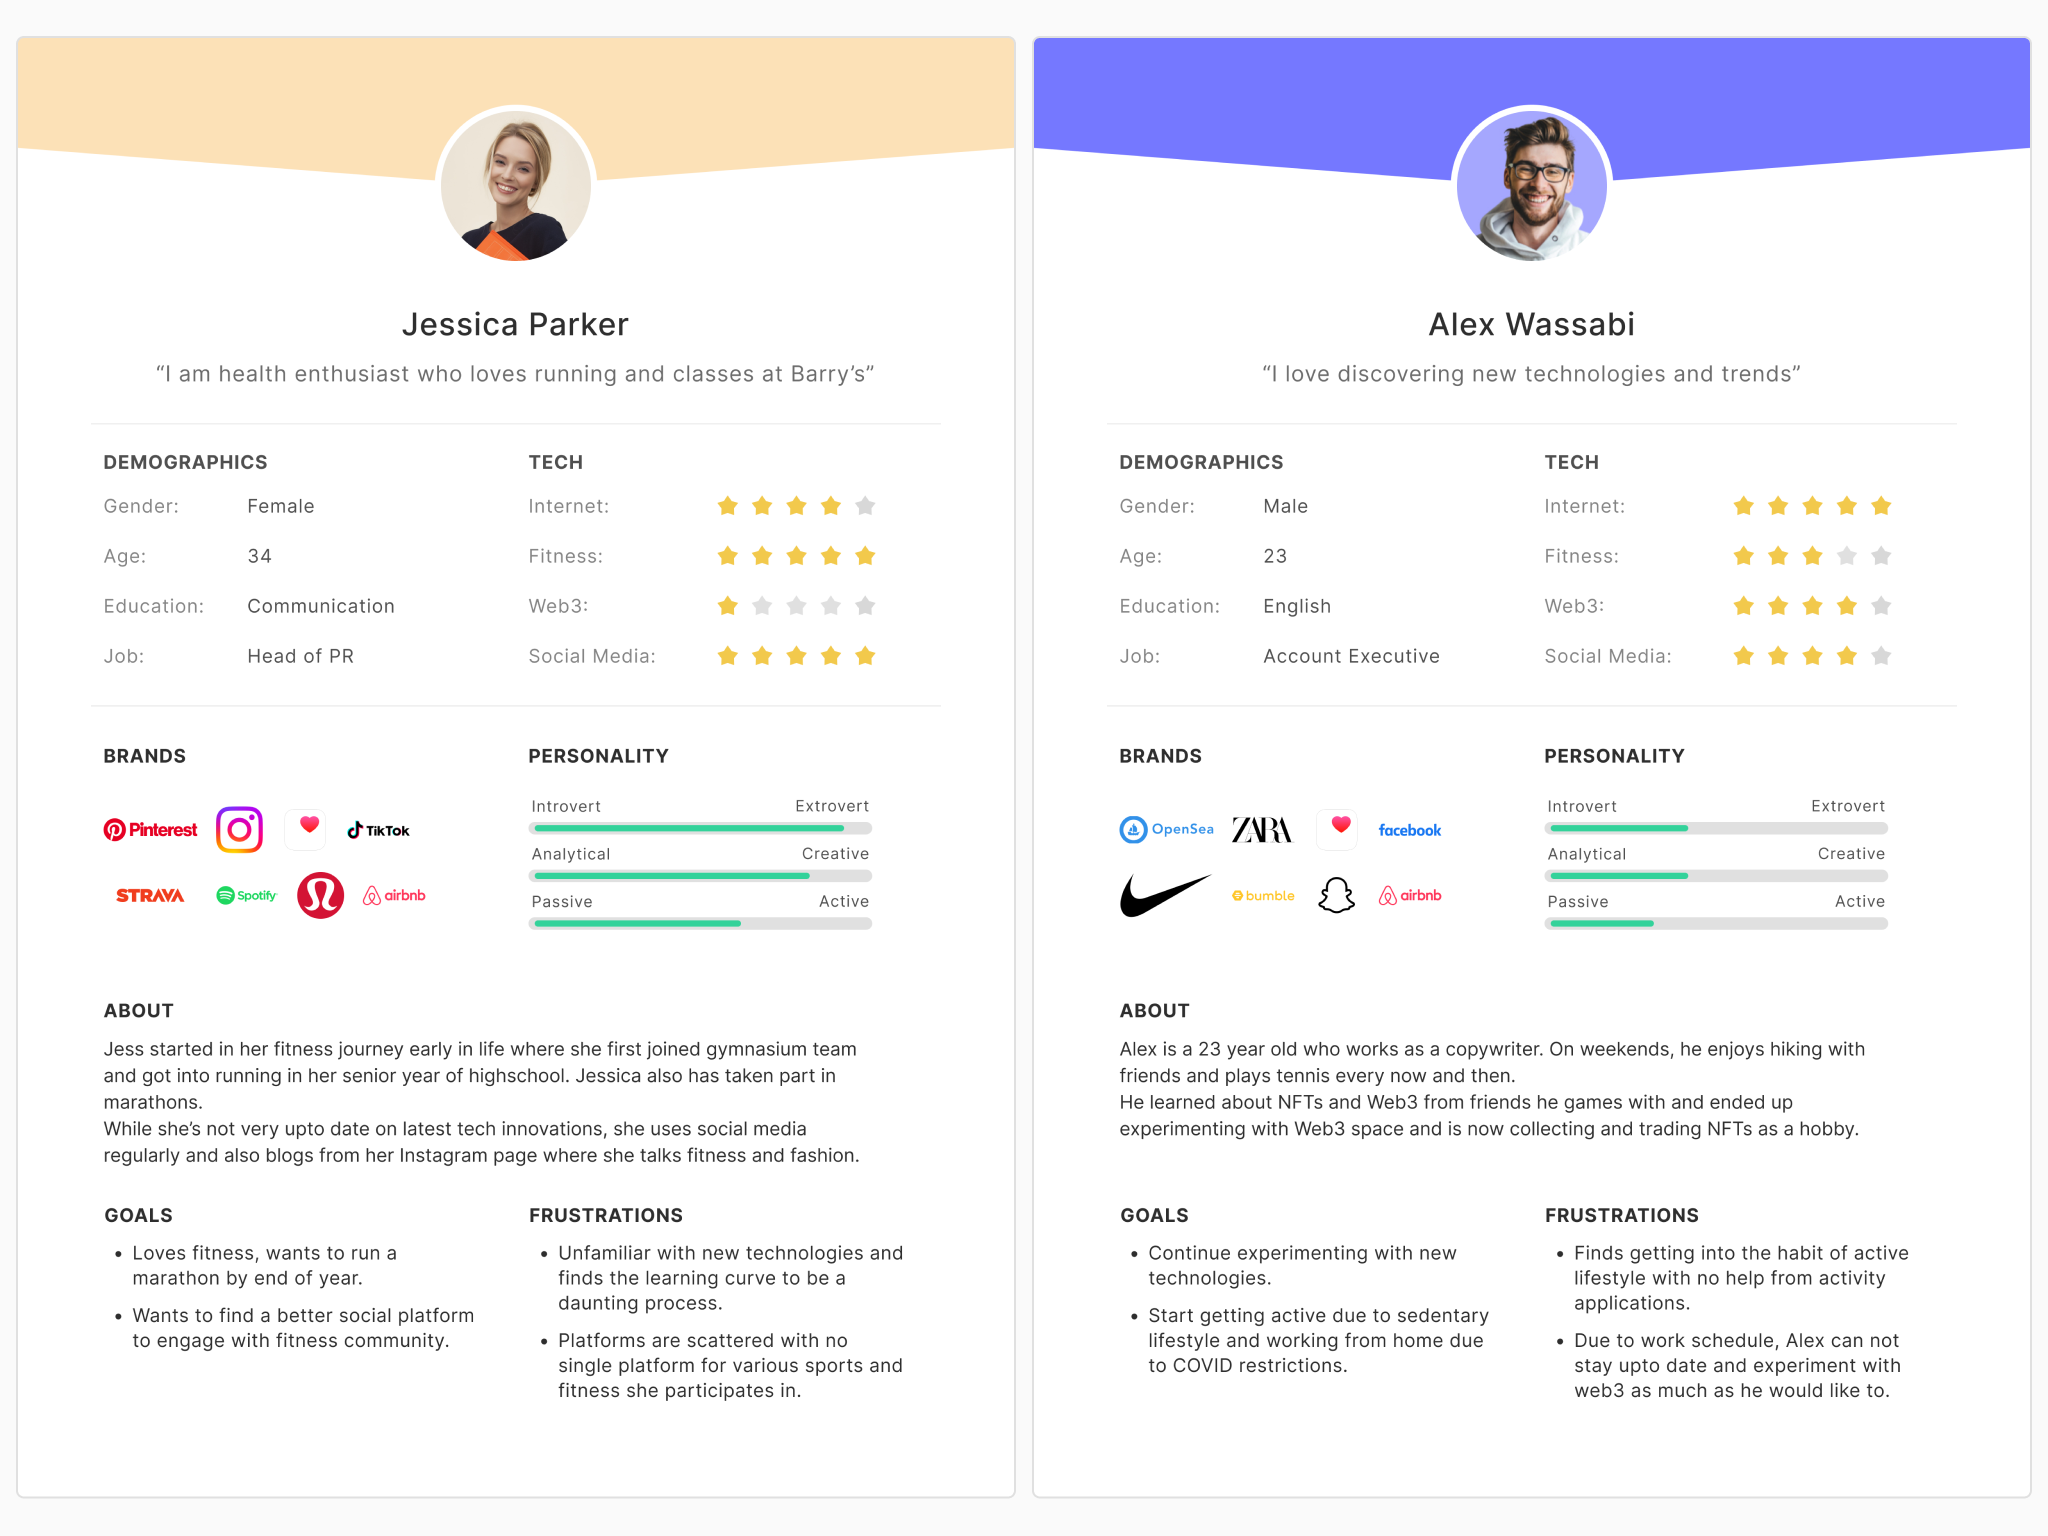 Image of two user personas we focused on for the application. One of the personas is more fitness focused, whereas the other has interests in technology, web3, and NFTs.